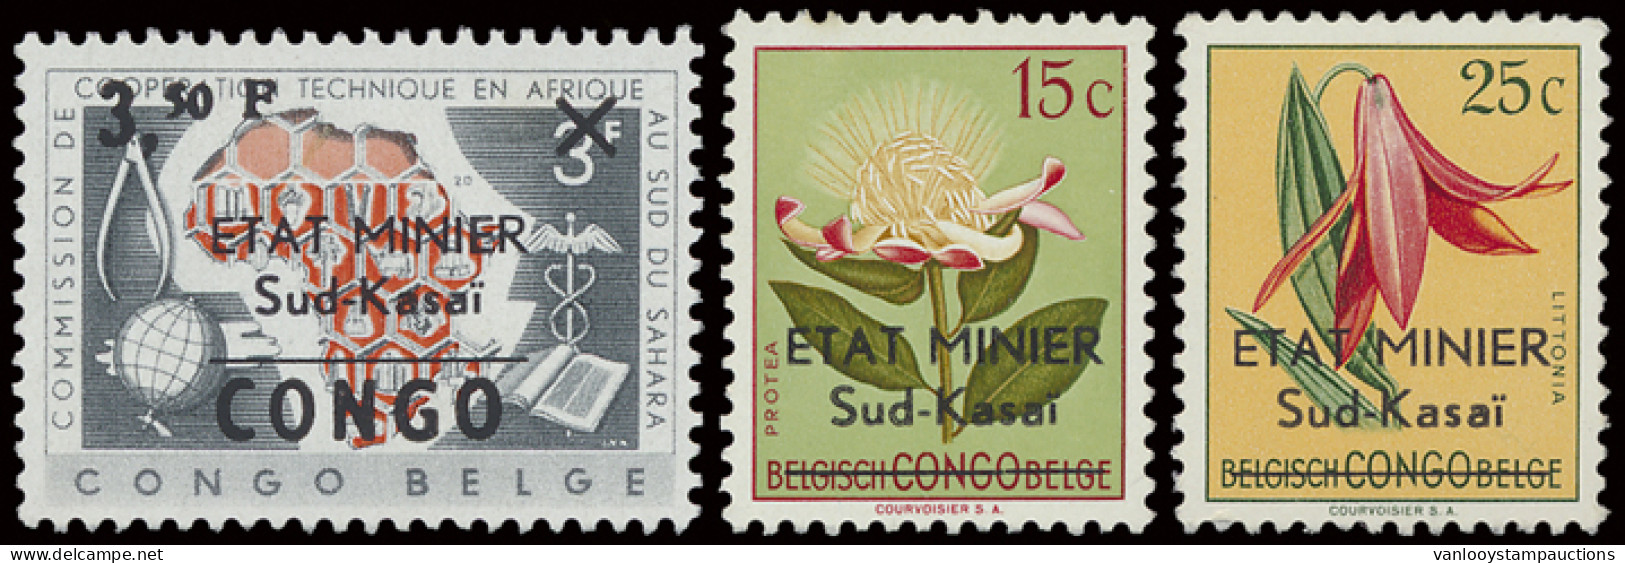 ** Lot Of 3 Stamps With Overprint ÉTAT MINIER SUD-KASAI, MNH, Very Scarce, Unlisted In OBP Catalogue, Only 3 Values Issu - South-Kasaï